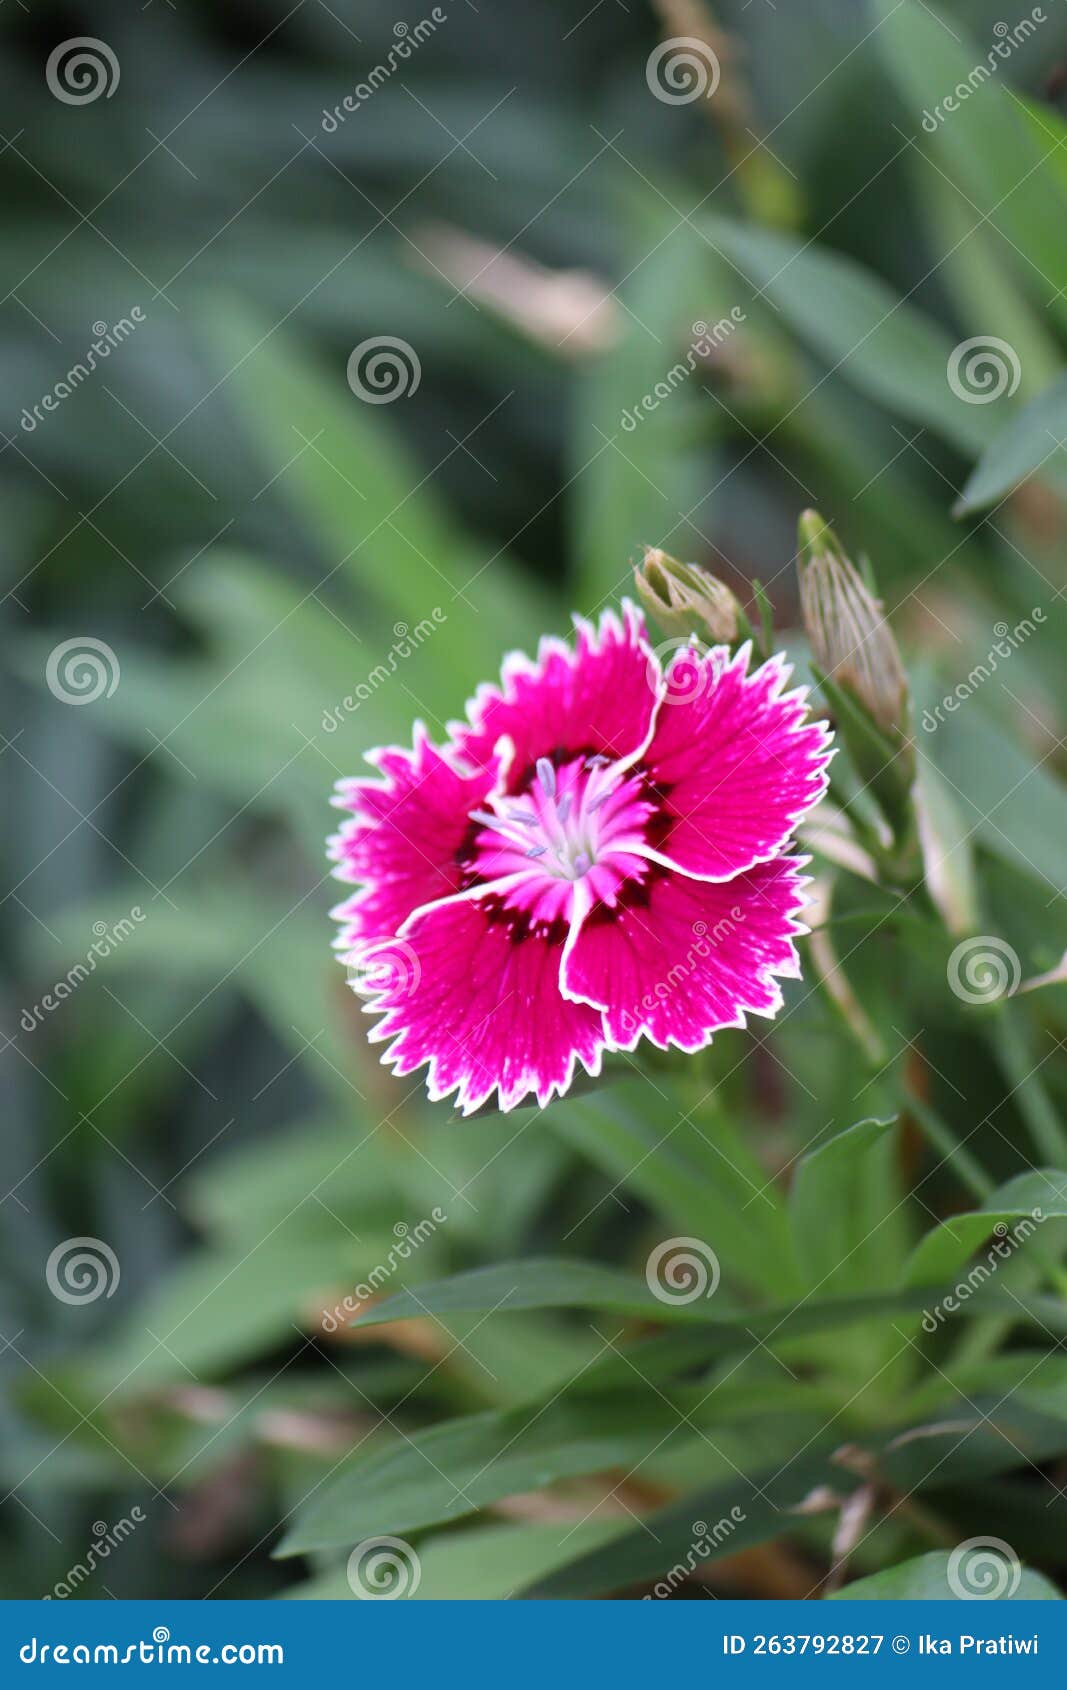 white-pink gradations of clavel plant flower (dianthus caryophyllus) on vertical photo format